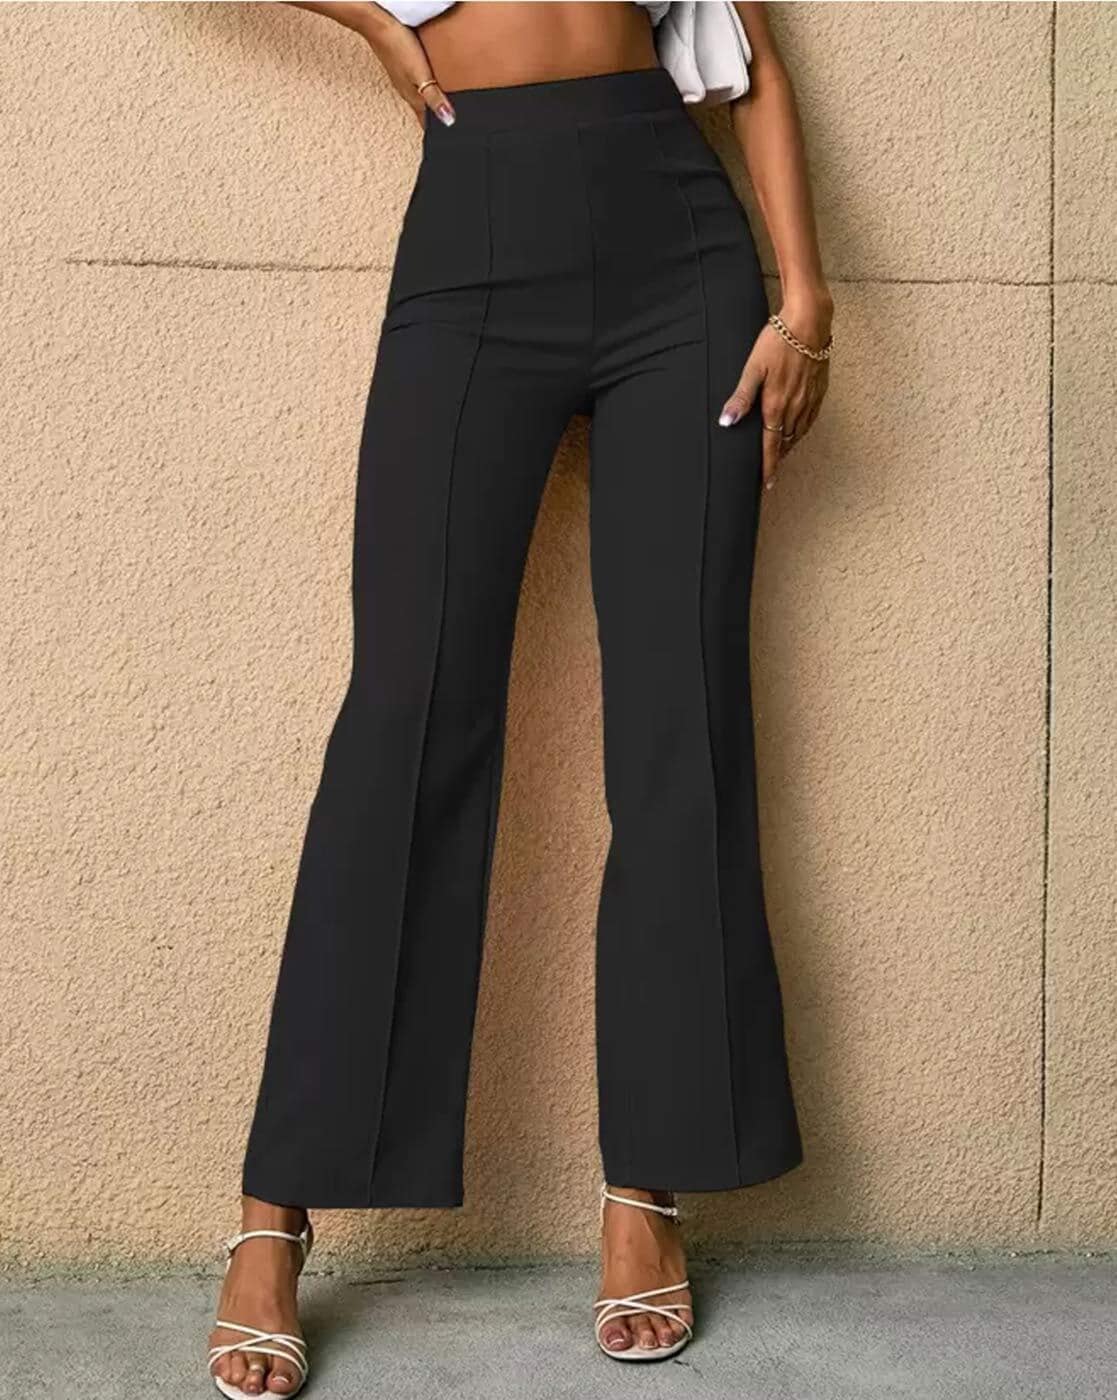 High Waisted Flared Trousers in Nude Crepe  The Dolls House Fashion